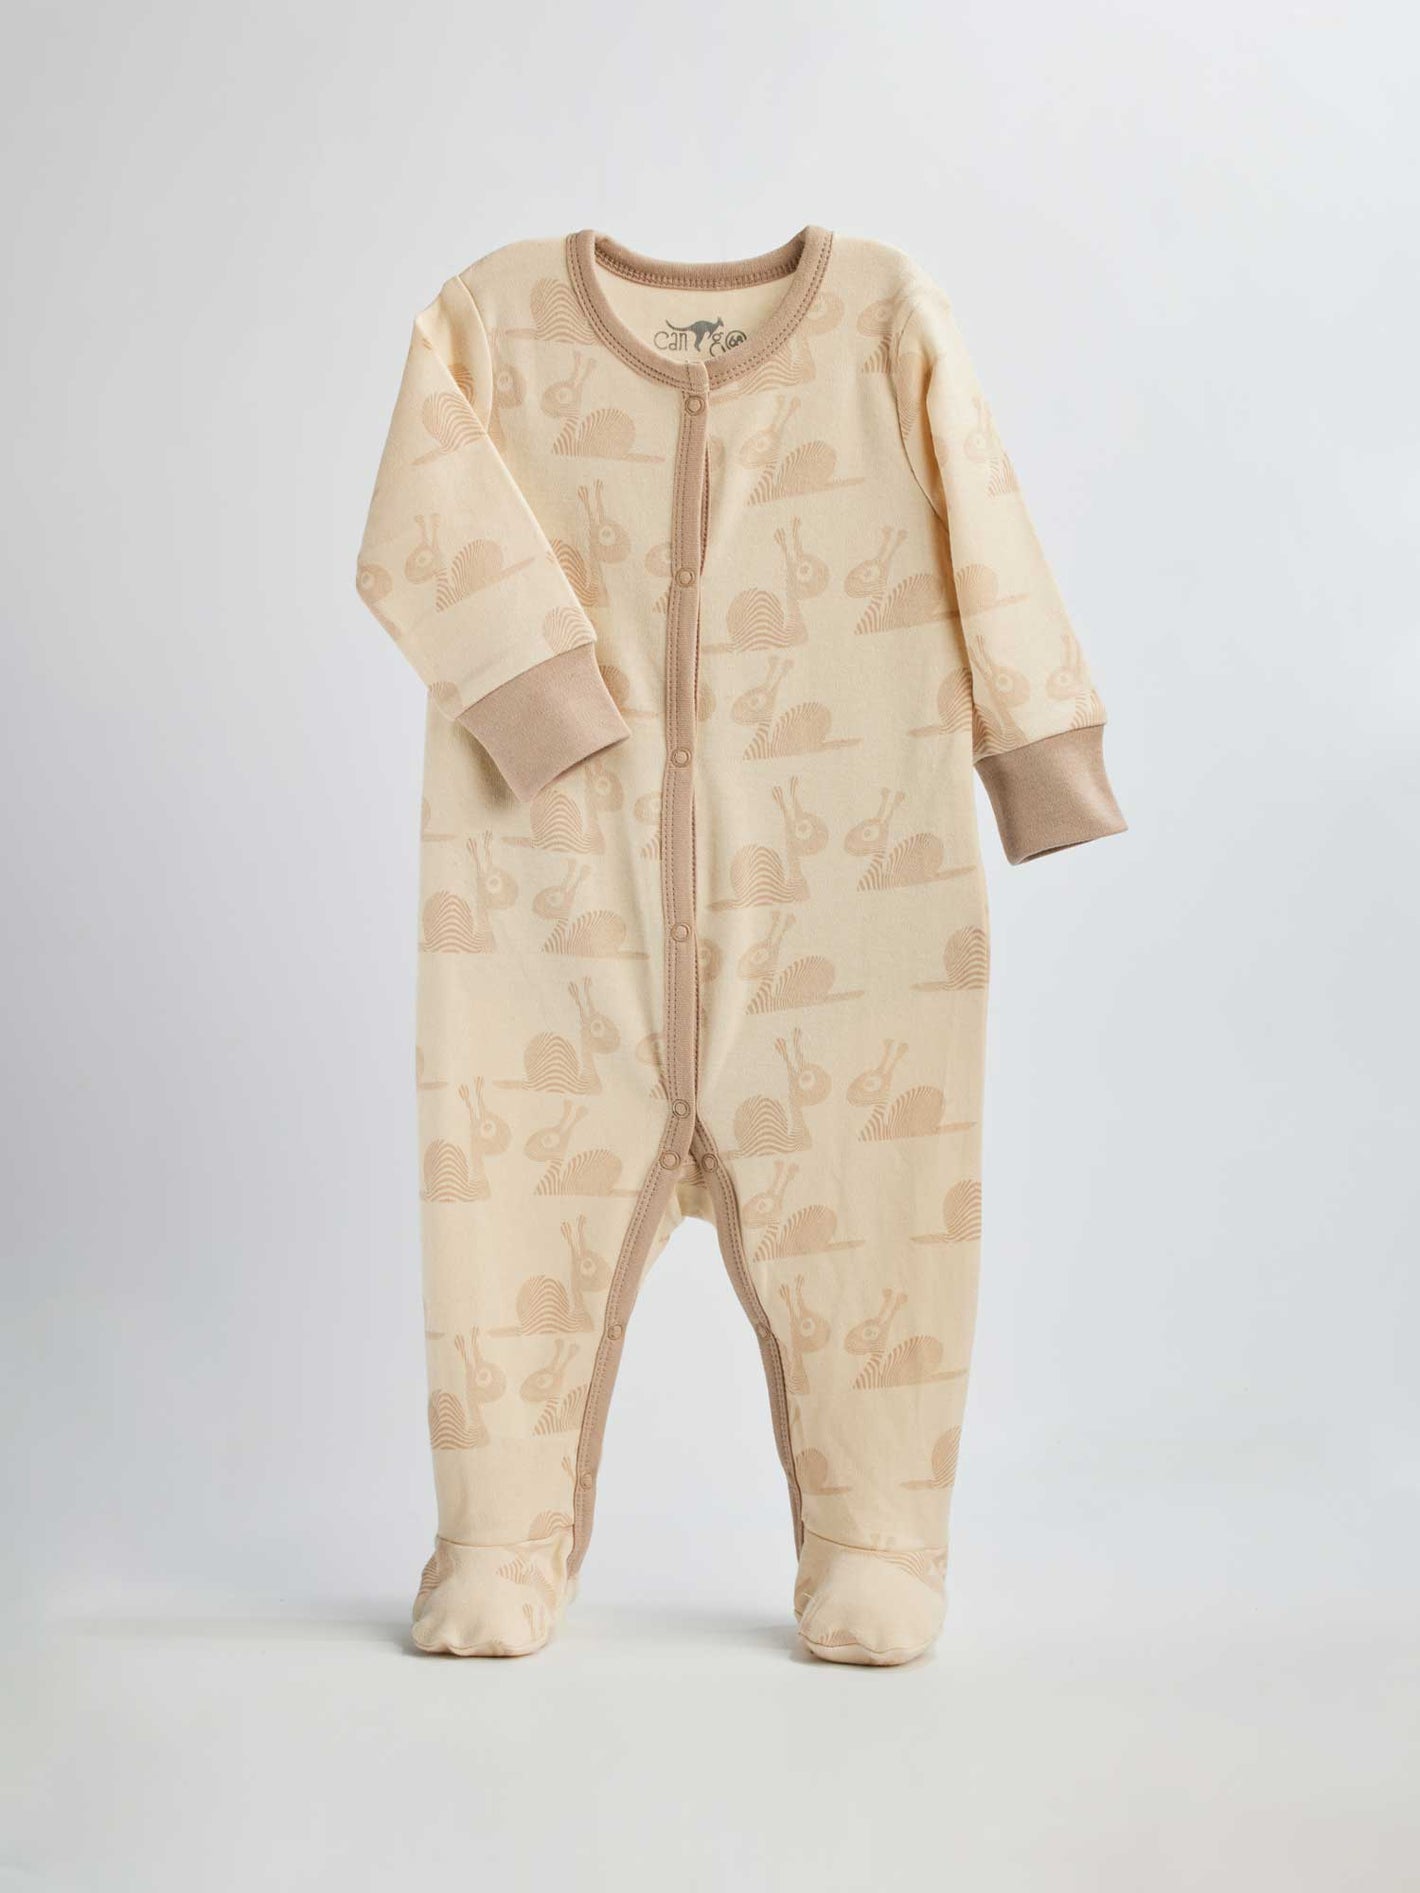 Snail Clothes - Infant Overall